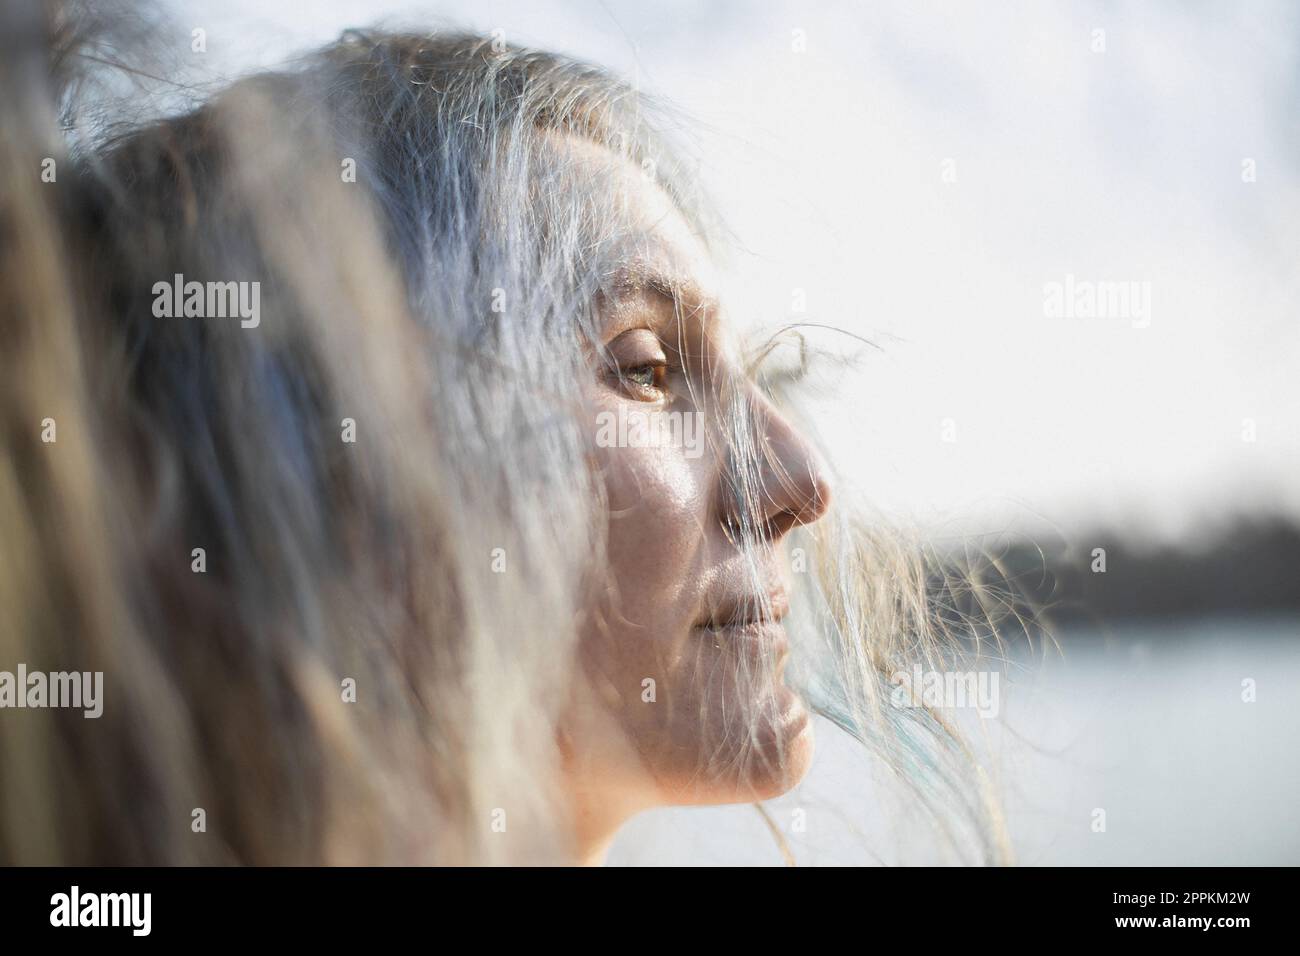 Close up woman with half closed eyes and silver hair falling on face portrait picture Stock Photo